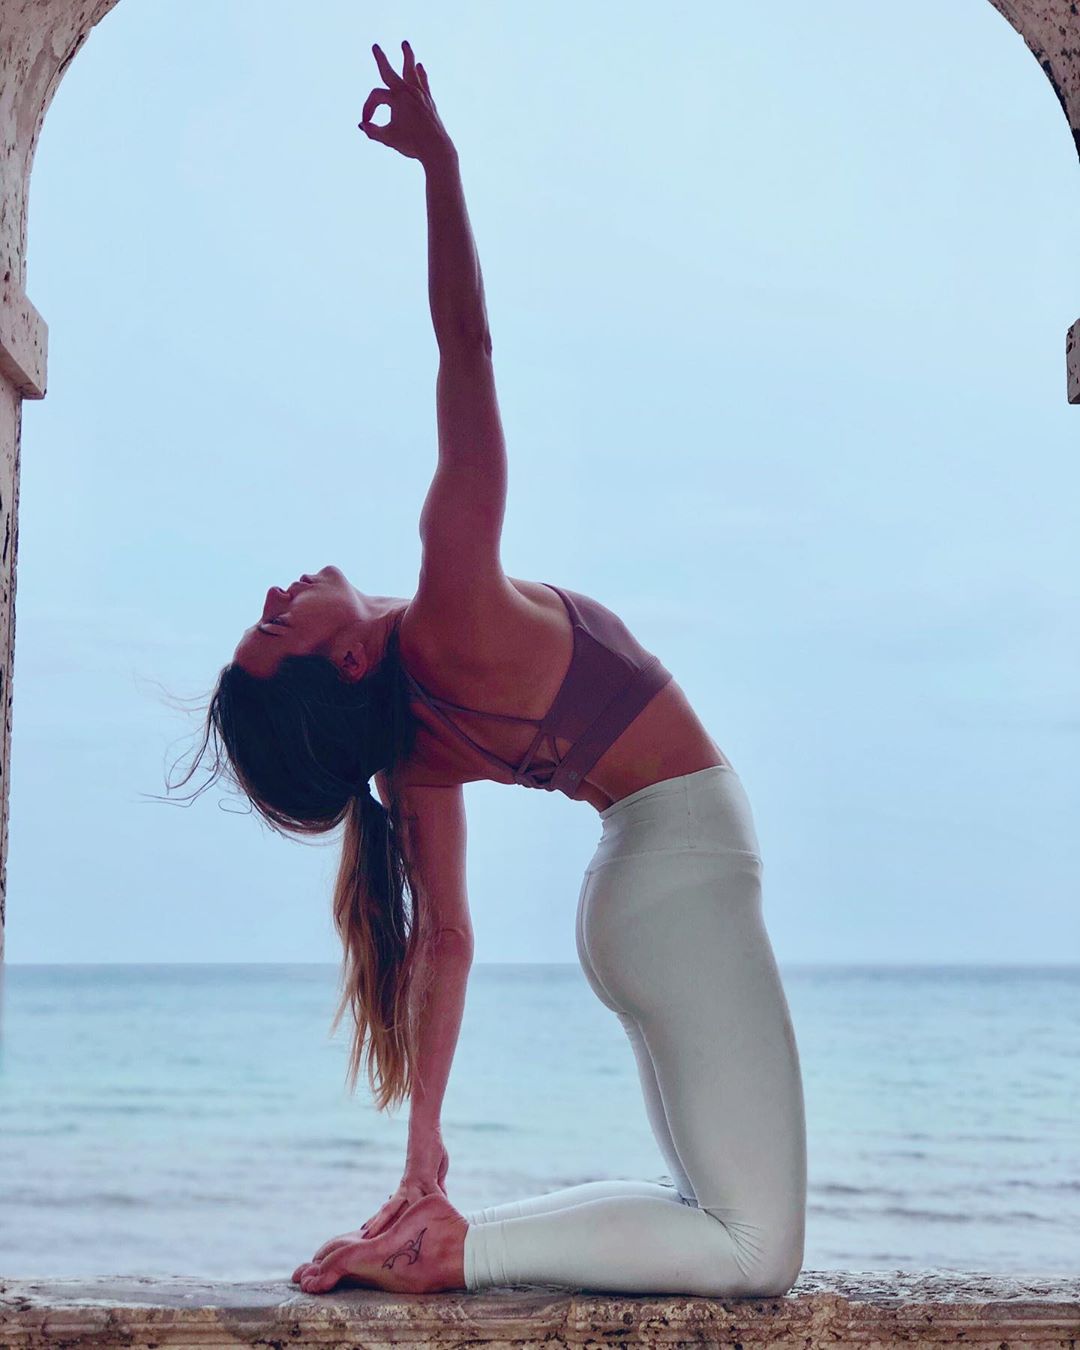 Find out why doing yoga on the beach allows for a deeper meditation - interview with yoga teacher Dara Starcove Fashion